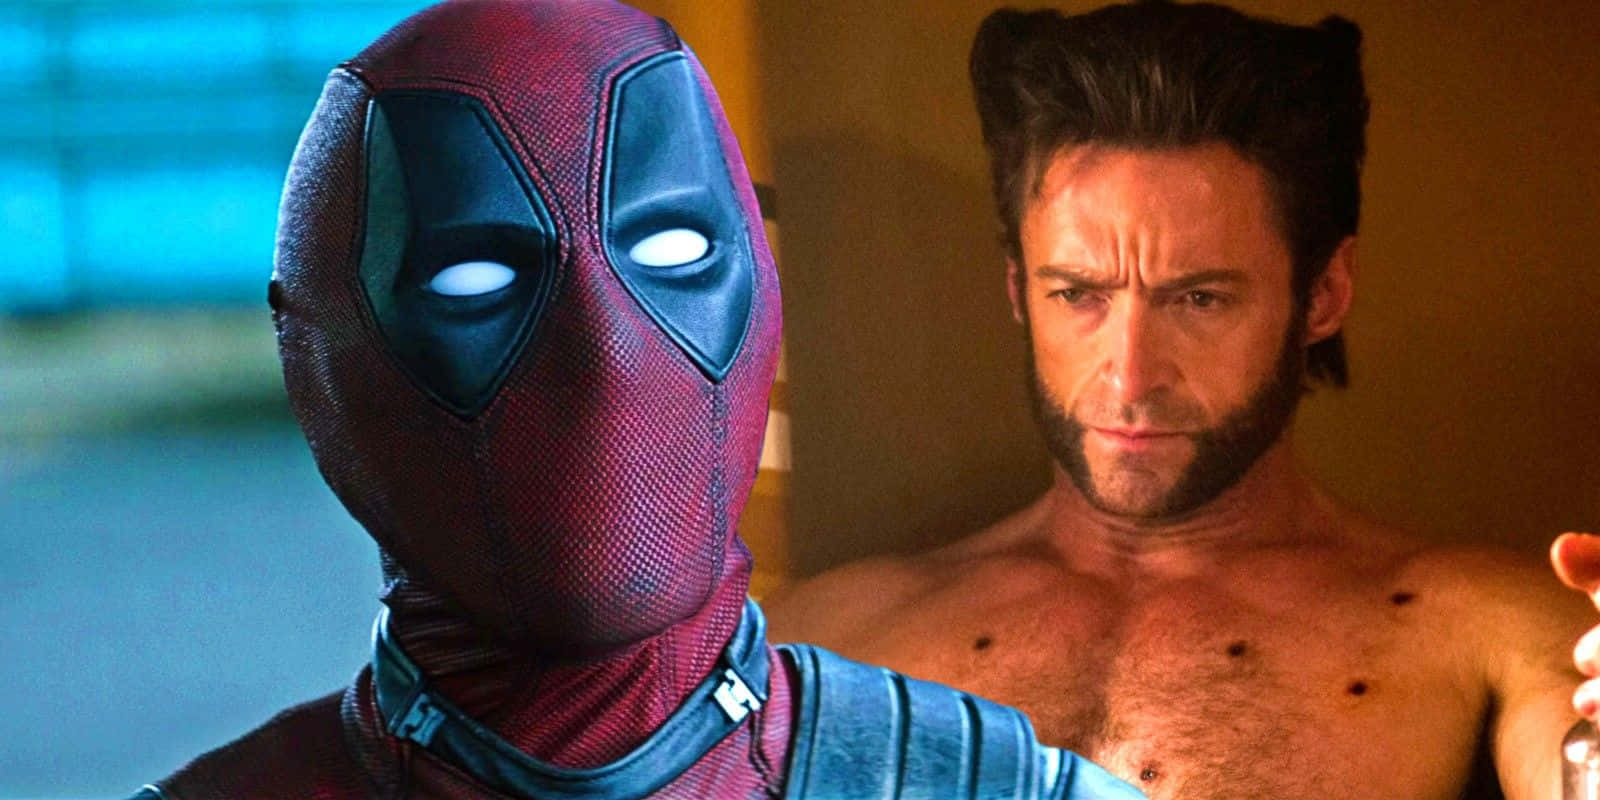 Deadpool and Wolverine - Marvel's Unstoppable Duo Wallpaper